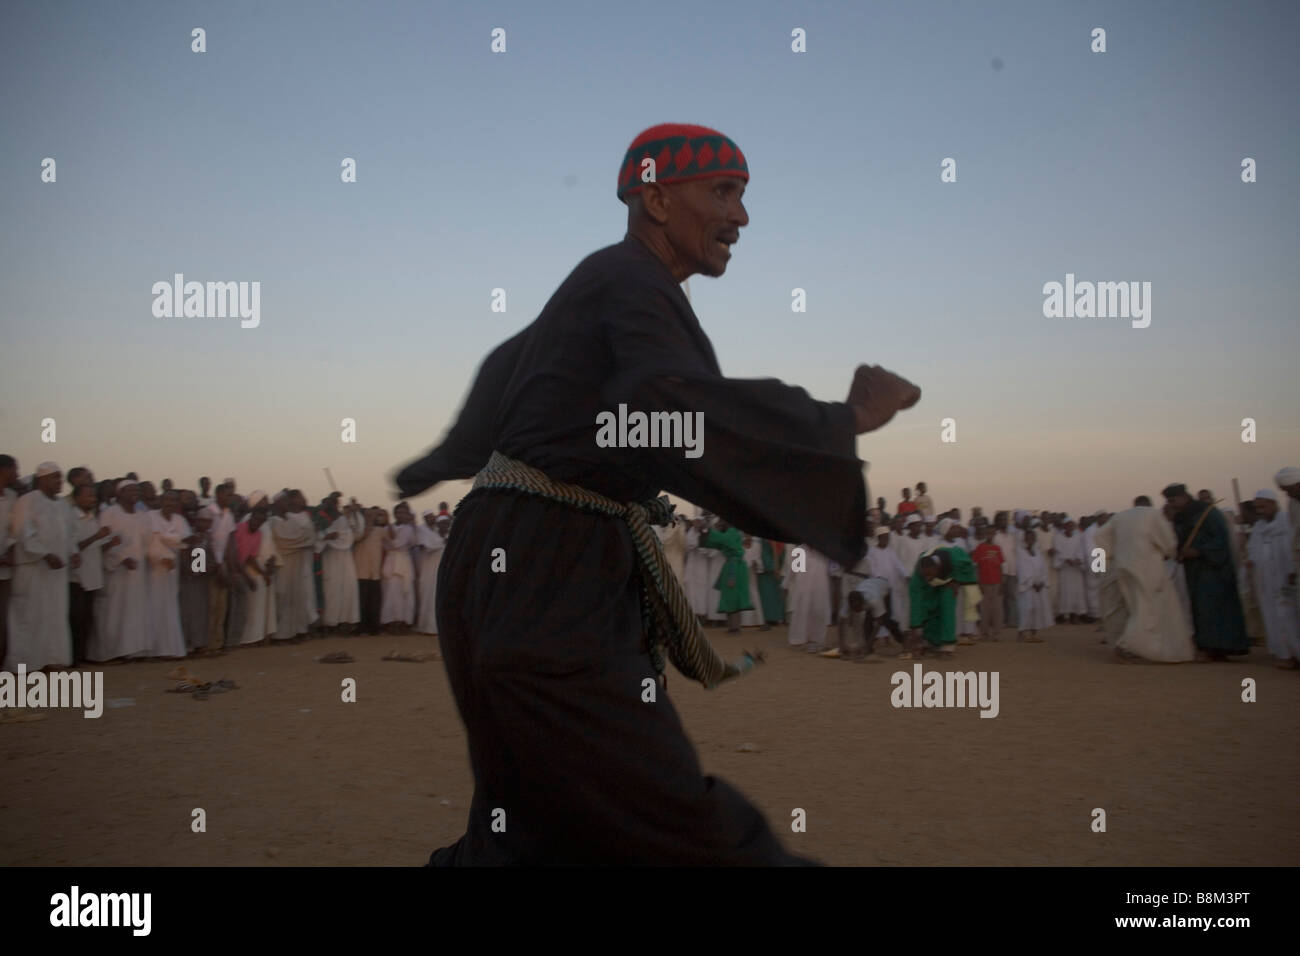 Sufi Dervish dancers swirling and praying next to the tomb of Hamed Al-Nil, the creator of this group in Khartoum, Sudan, Africa Stock Photo